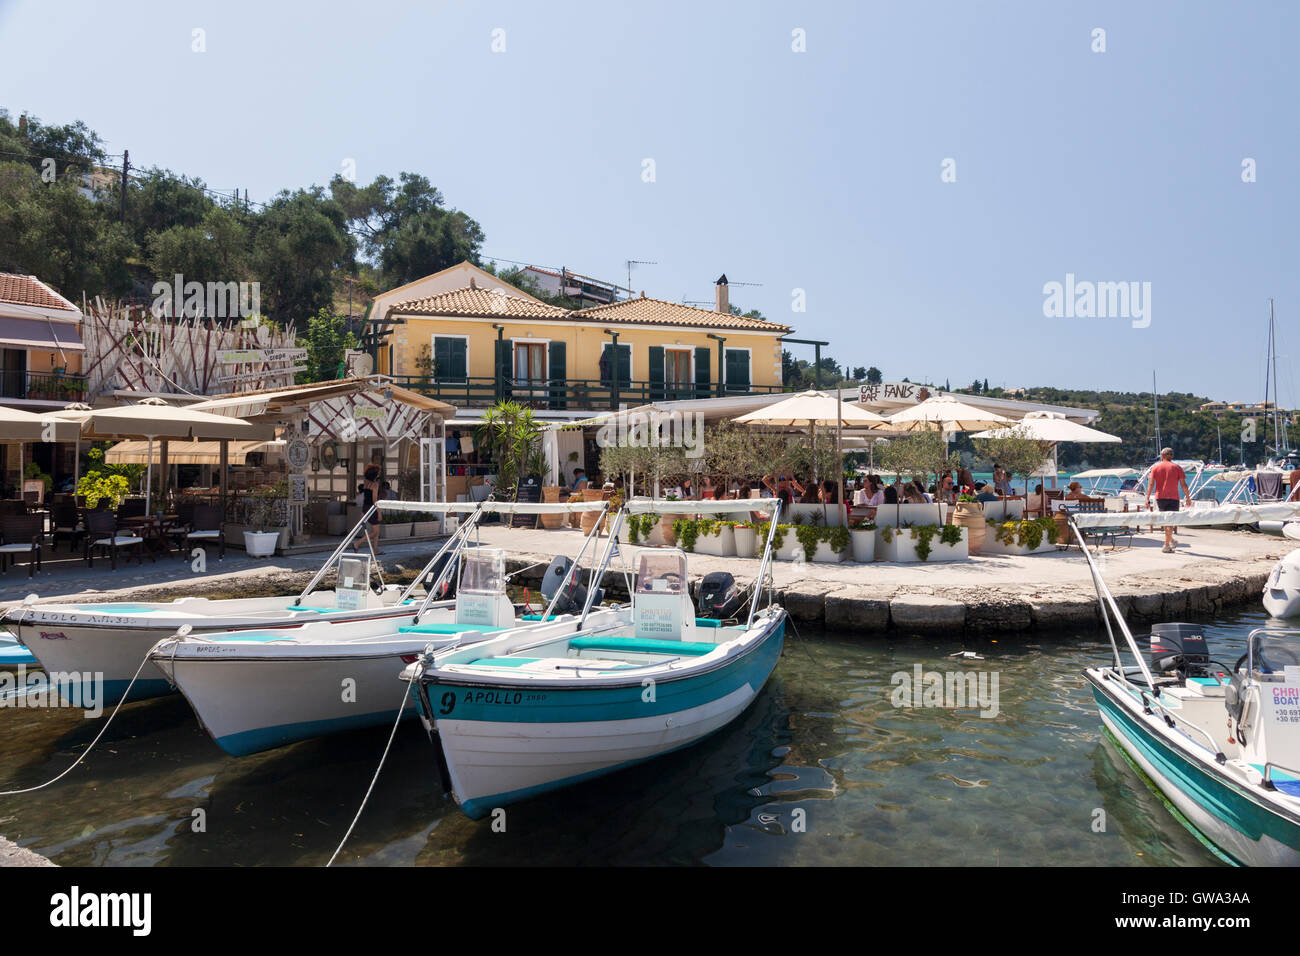 The village of Lakka on the island of  Paxos, Greece. The smallest inhabited Ionian island. Stock Photo